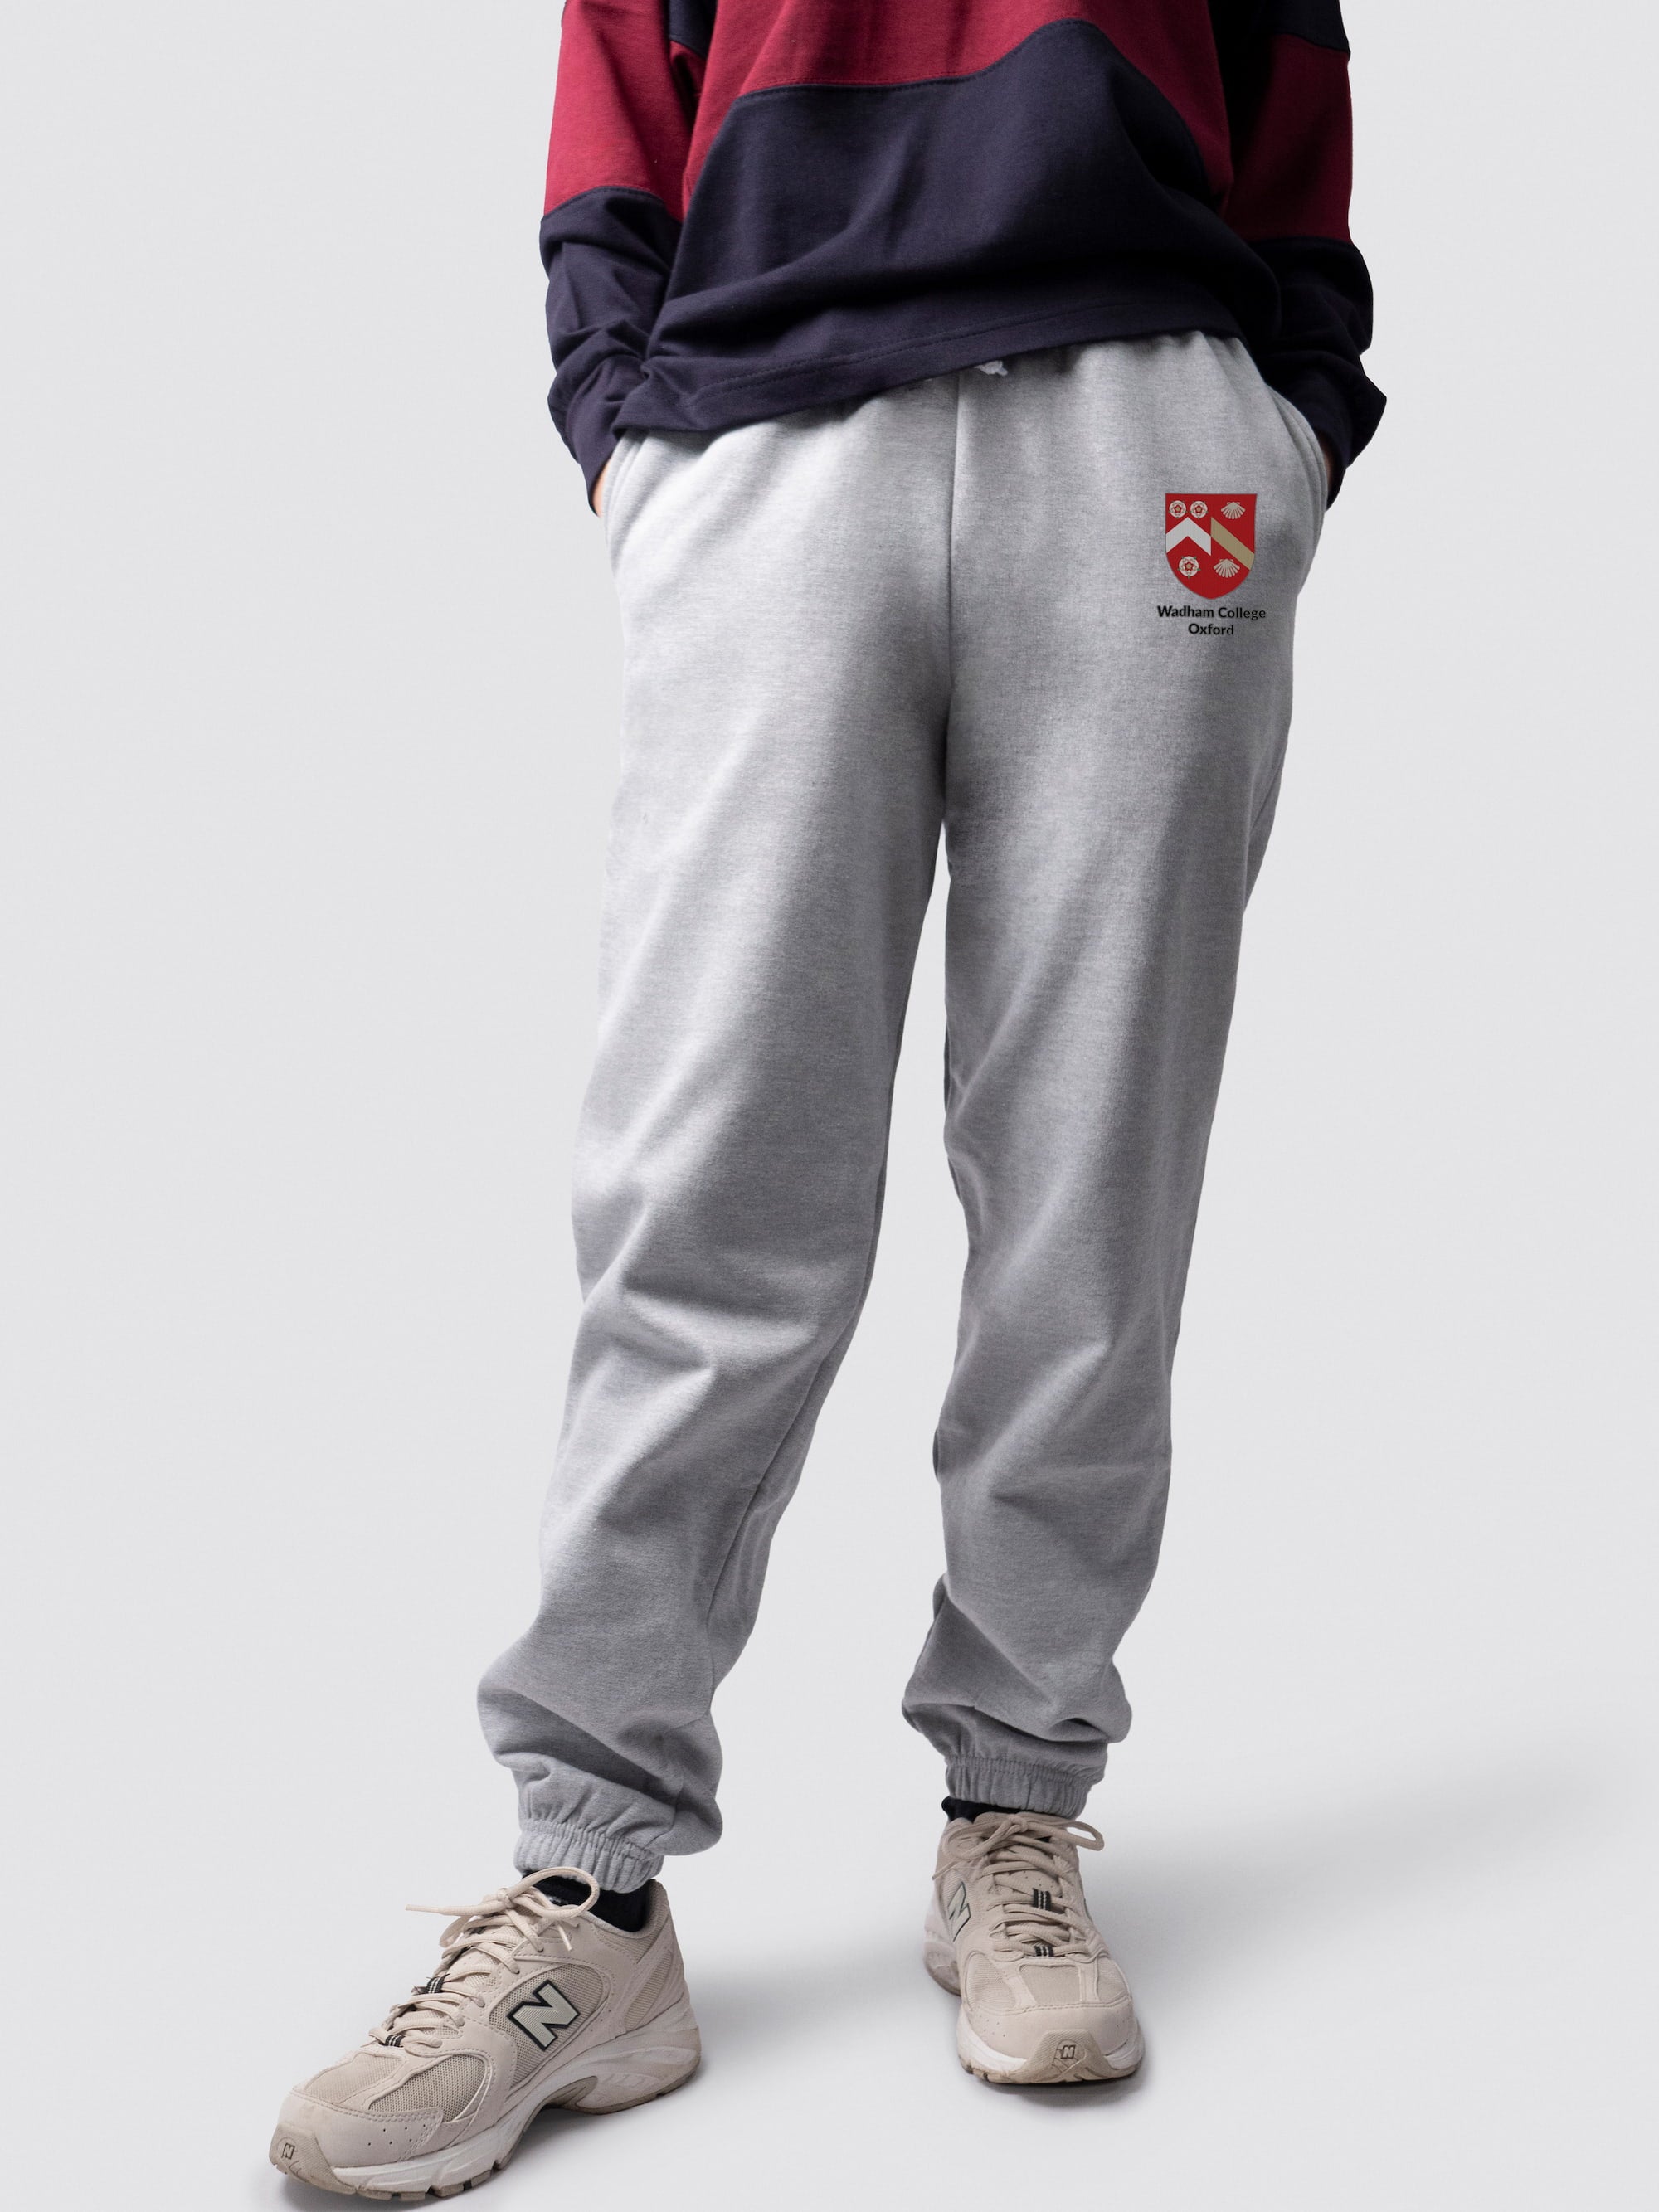 undergraduate cuffed sweatpants, made from soft cotton fabric, with Wadham logo